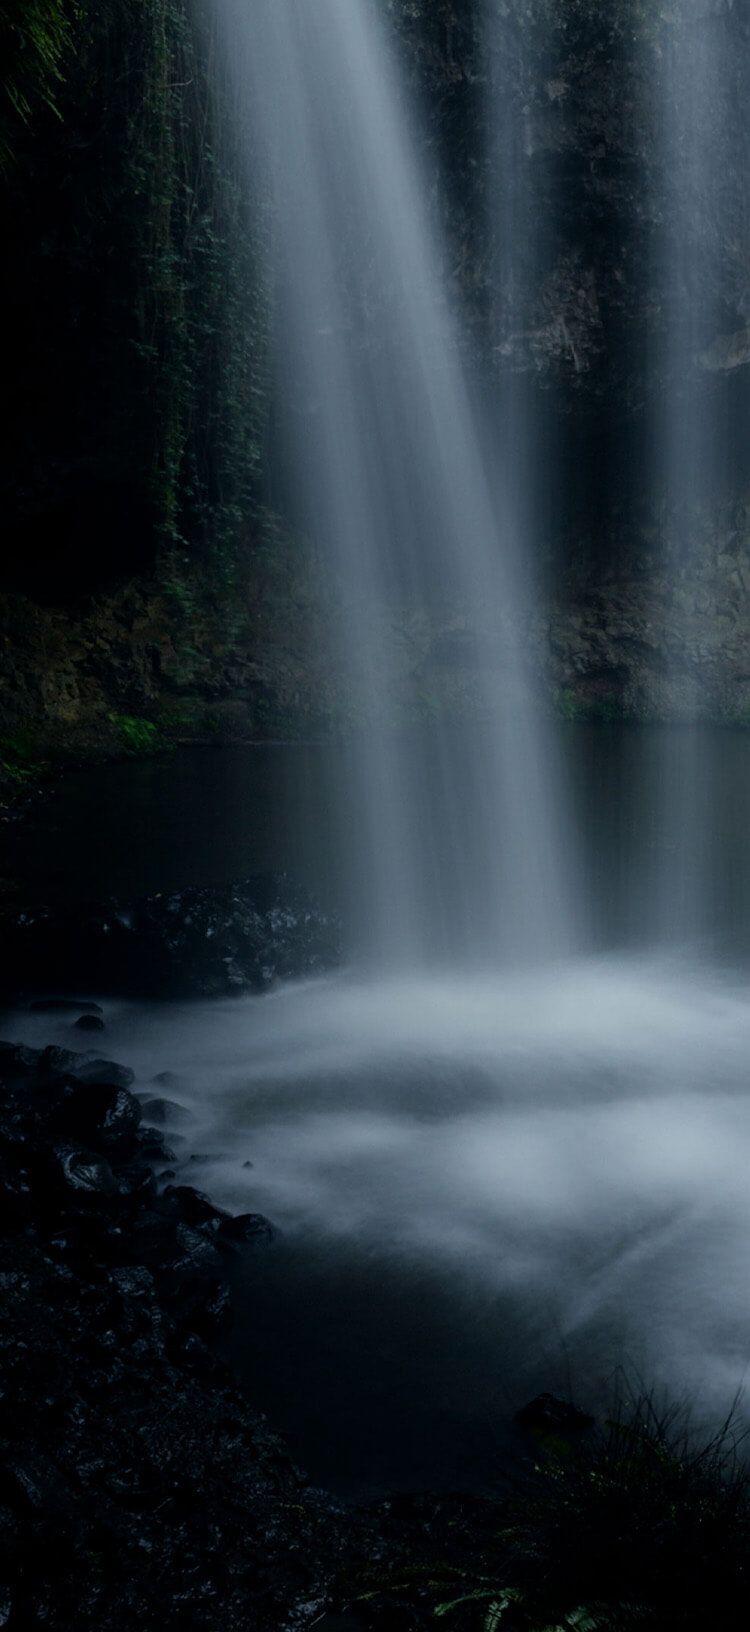 A Complete Guide to Shutter Speed: Examples & Photos